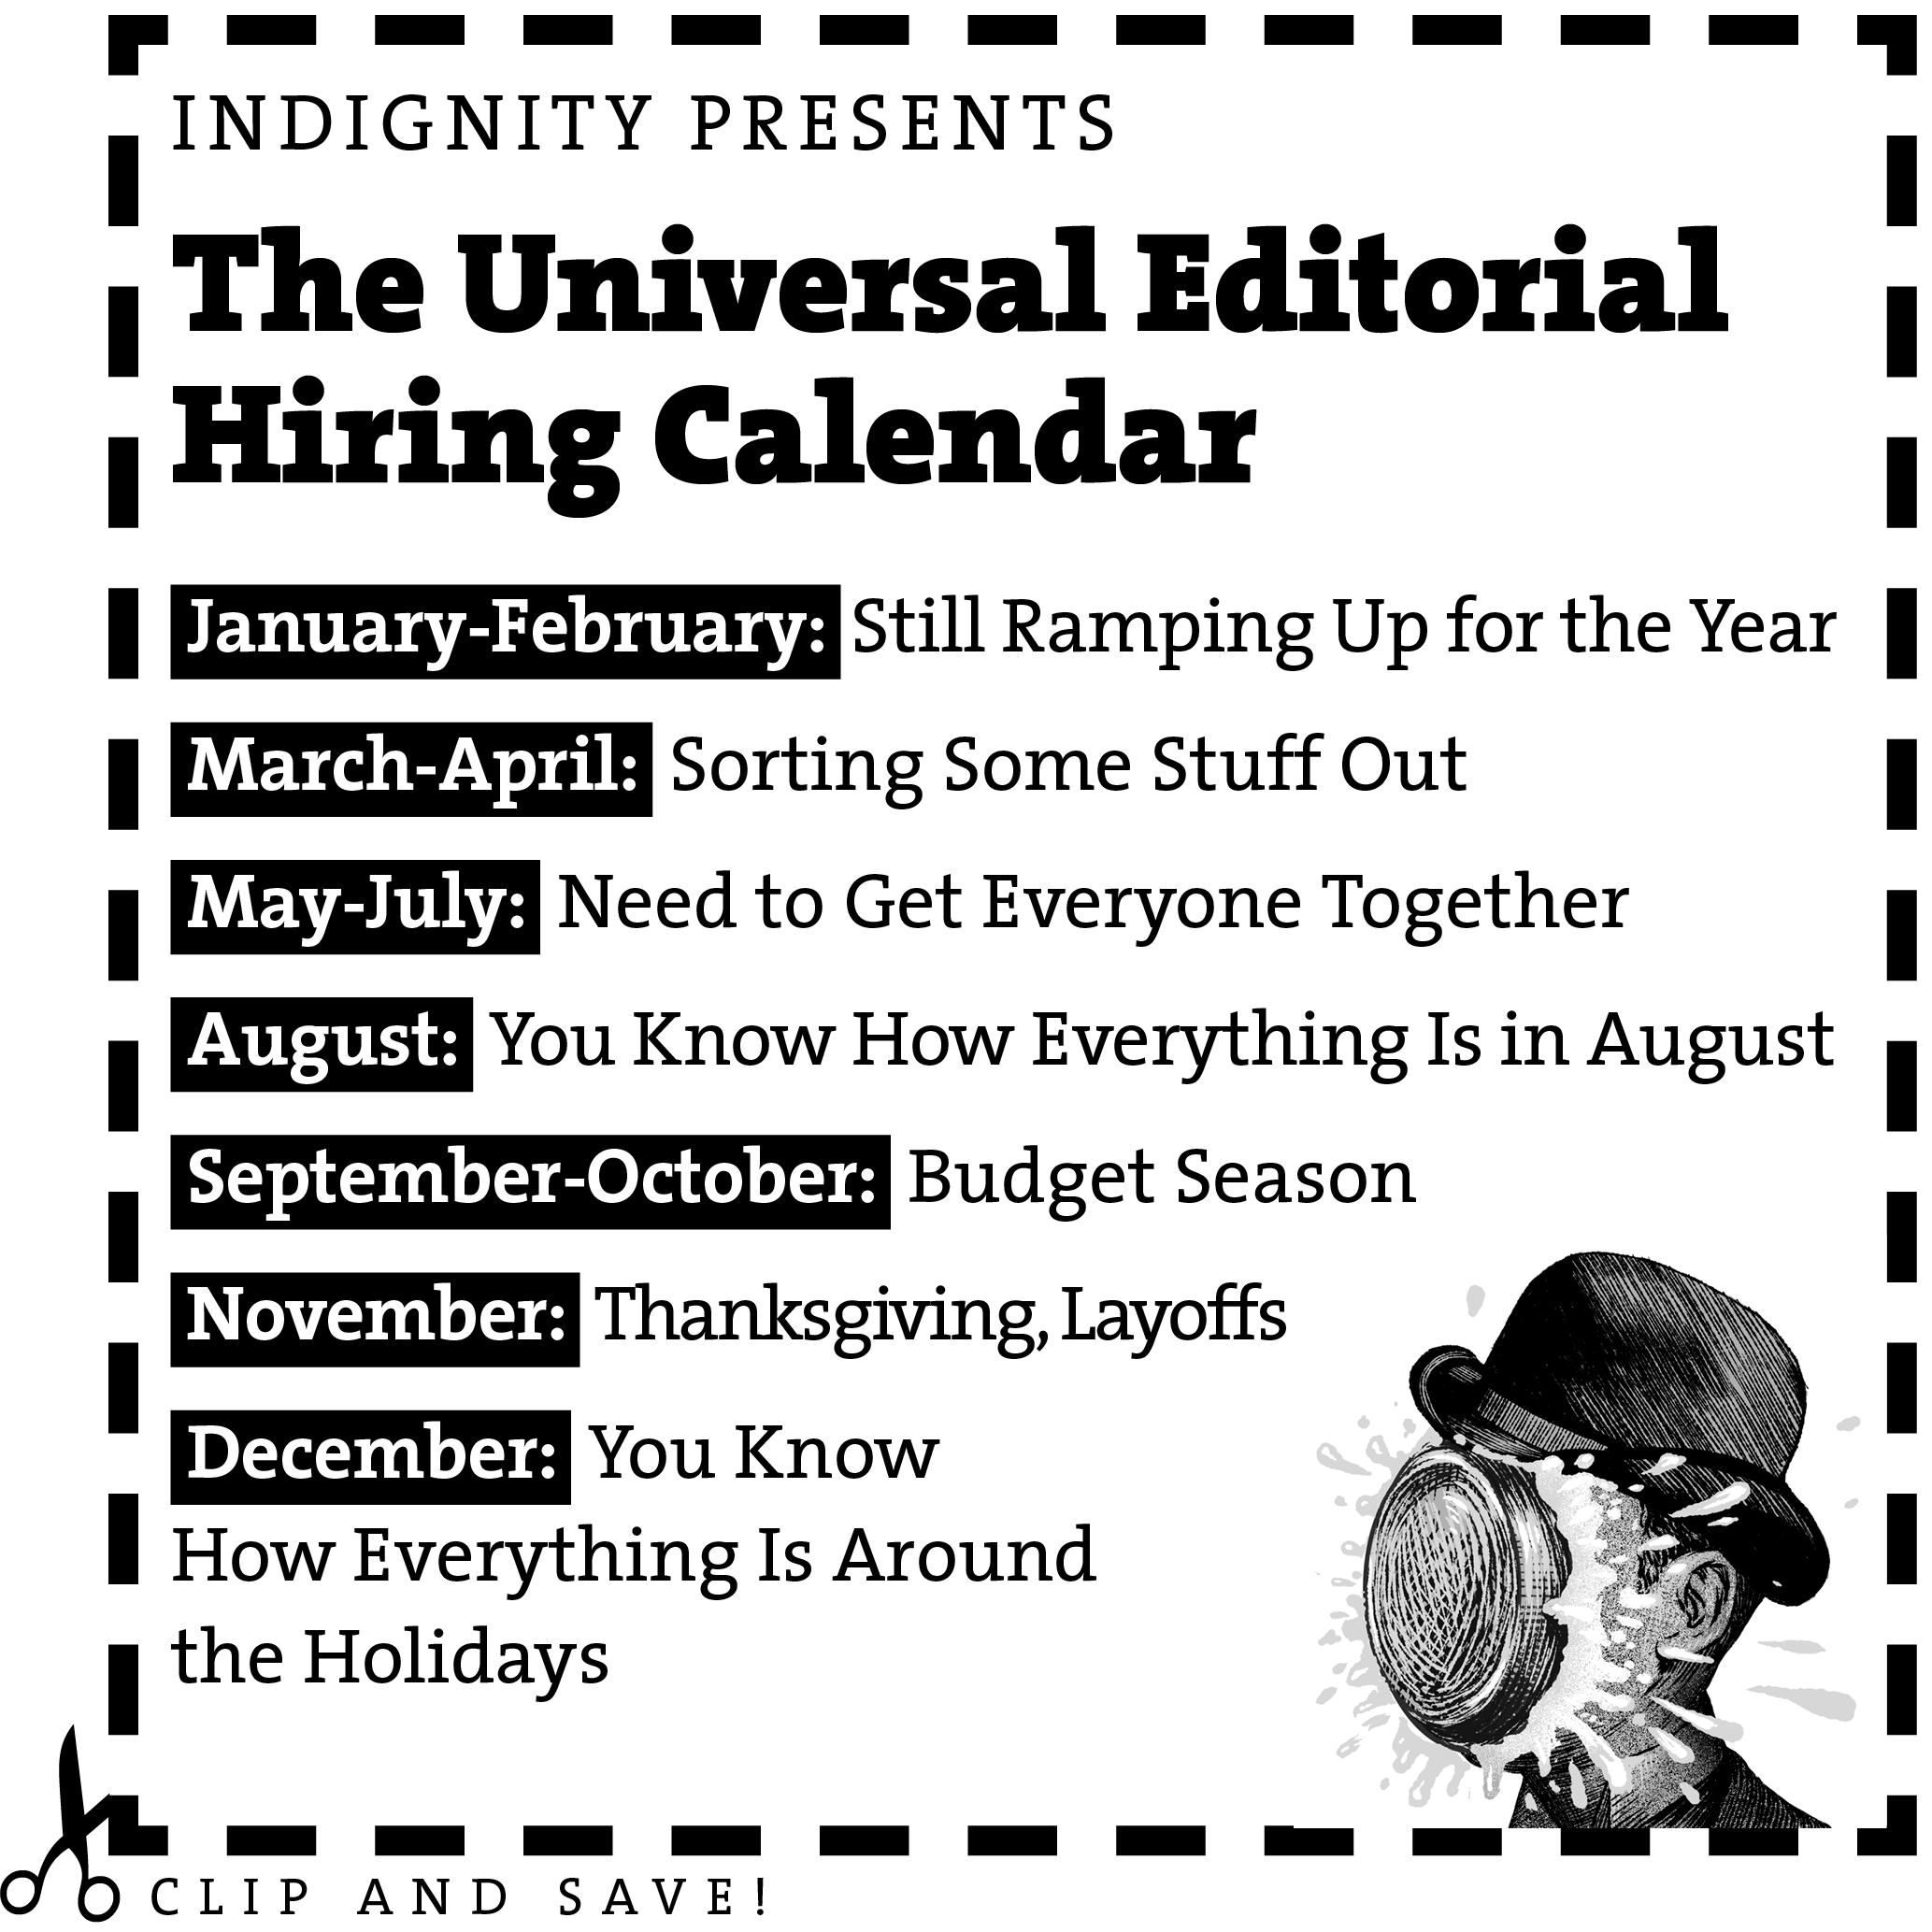 Clip and Save! Indignity Presents the Universal Editorial Hiring Calendar Jan.-Feb.: Still Ramping Up for the Year March-April: Sorting Some Stuff Out May–July: Need to Get Everyone Together You Know How Everything Is in August September–October: Budget Season November: Thanksgiving, Layoffs You Know How Everything Is Around the Holidays